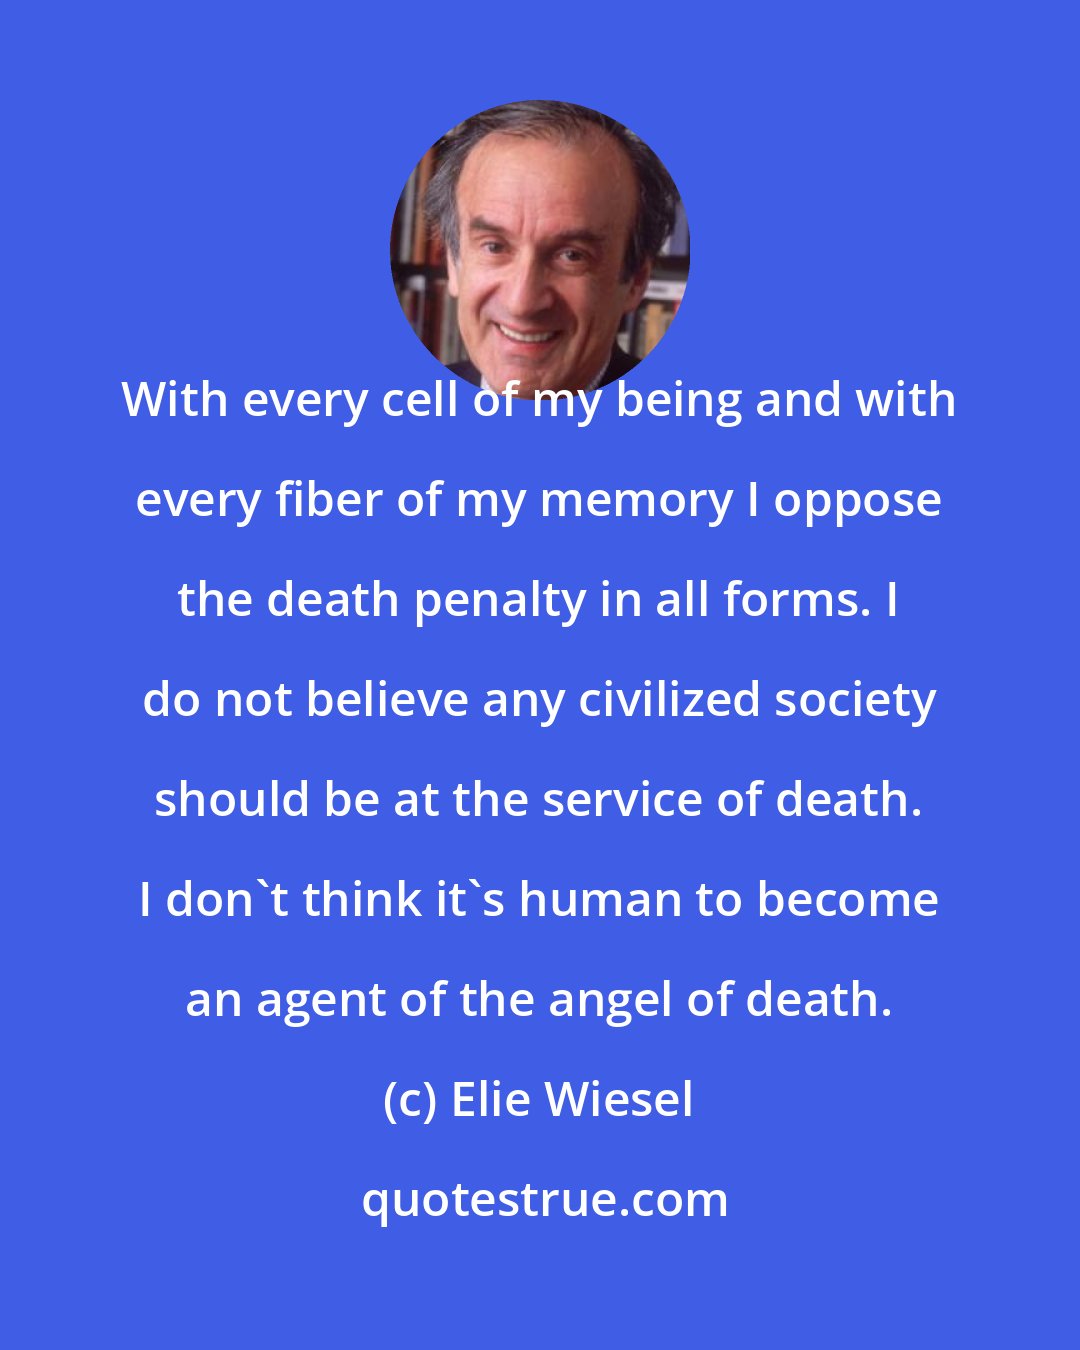 Elie Wiesel: With every cell of my being and with every fiber of my memory I oppose the death penalty in all forms. I do not believe any civilized society should be at the service of death. I don't think it's human to become an agent of the angel of death.